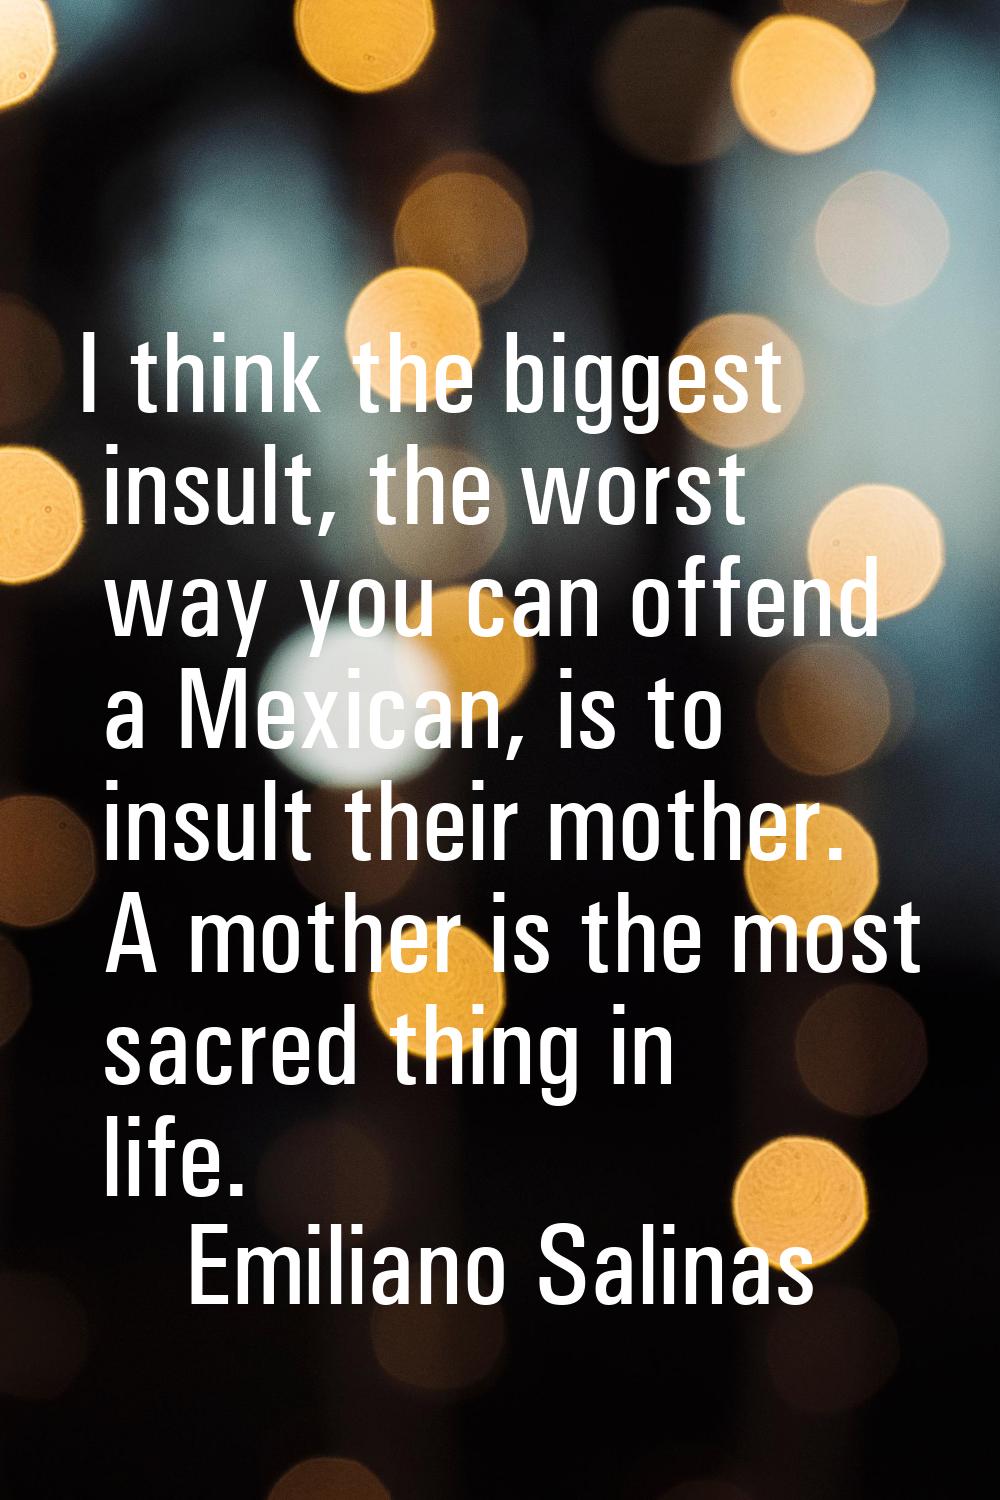 I think the biggest insult, the worst way you can offend a Mexican, is to insult their mother. A mo